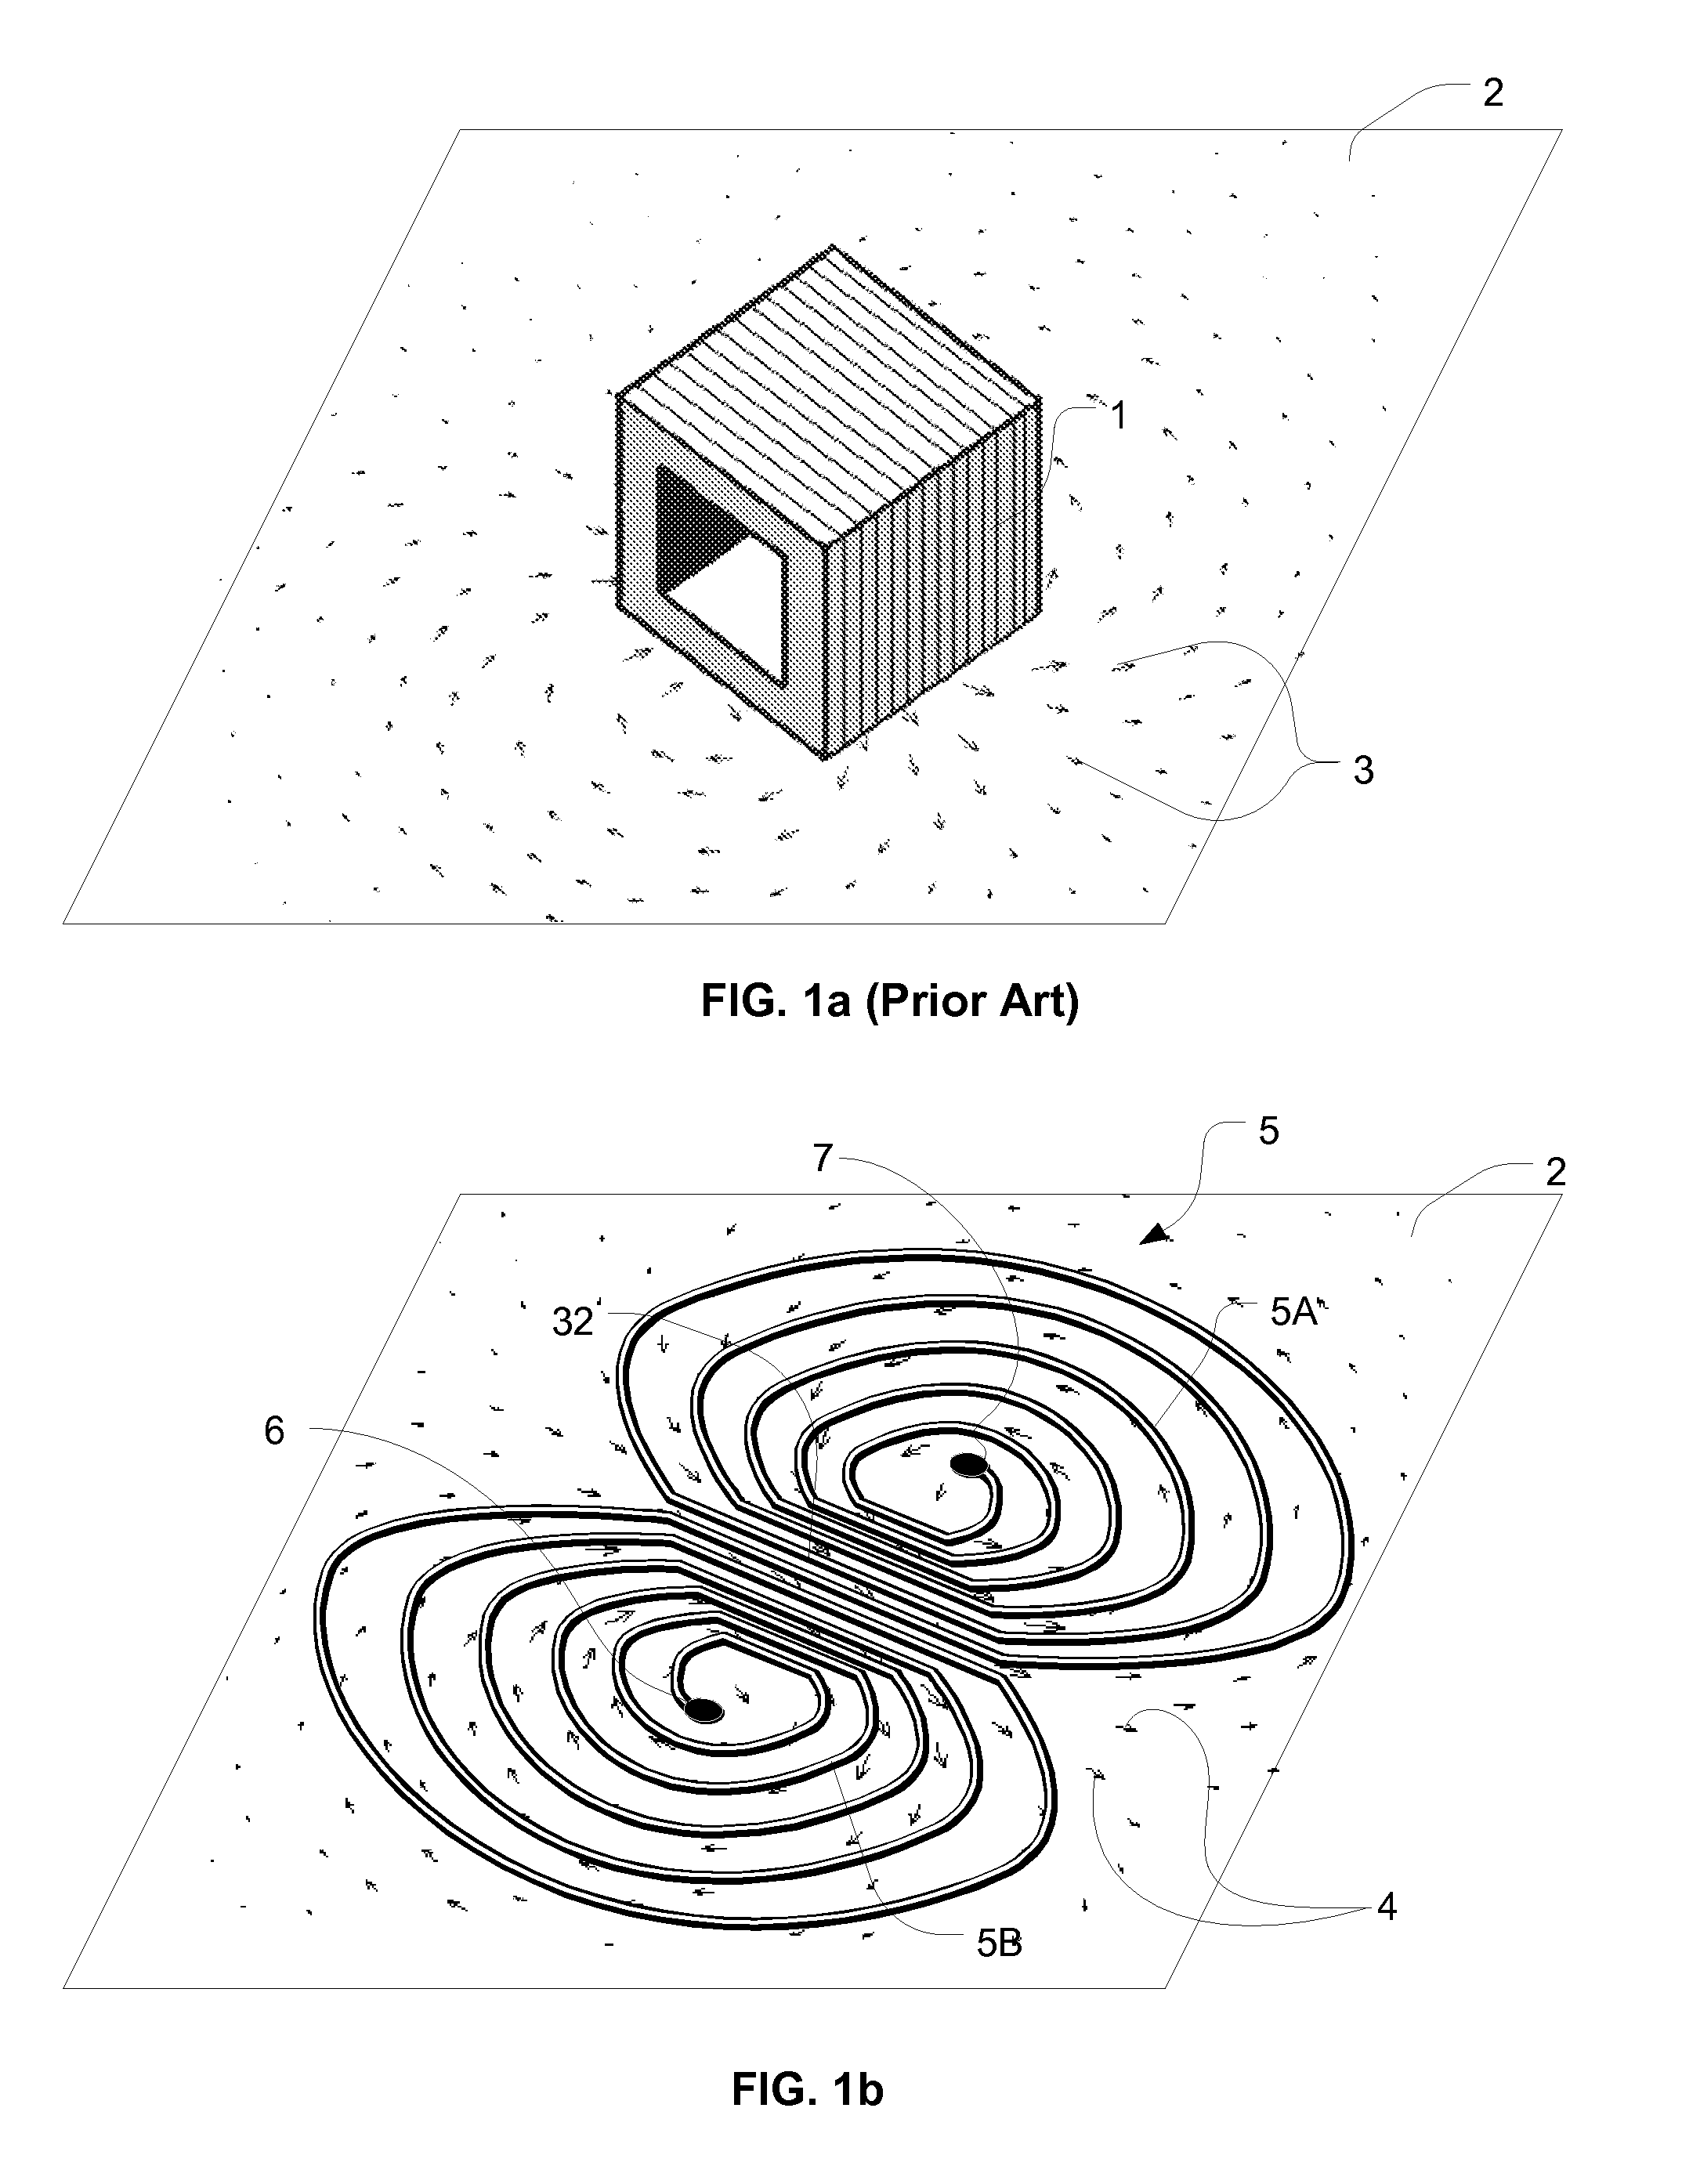 2d coil and a method of obtaining ec response of 3D coils using the 2d coil configuration